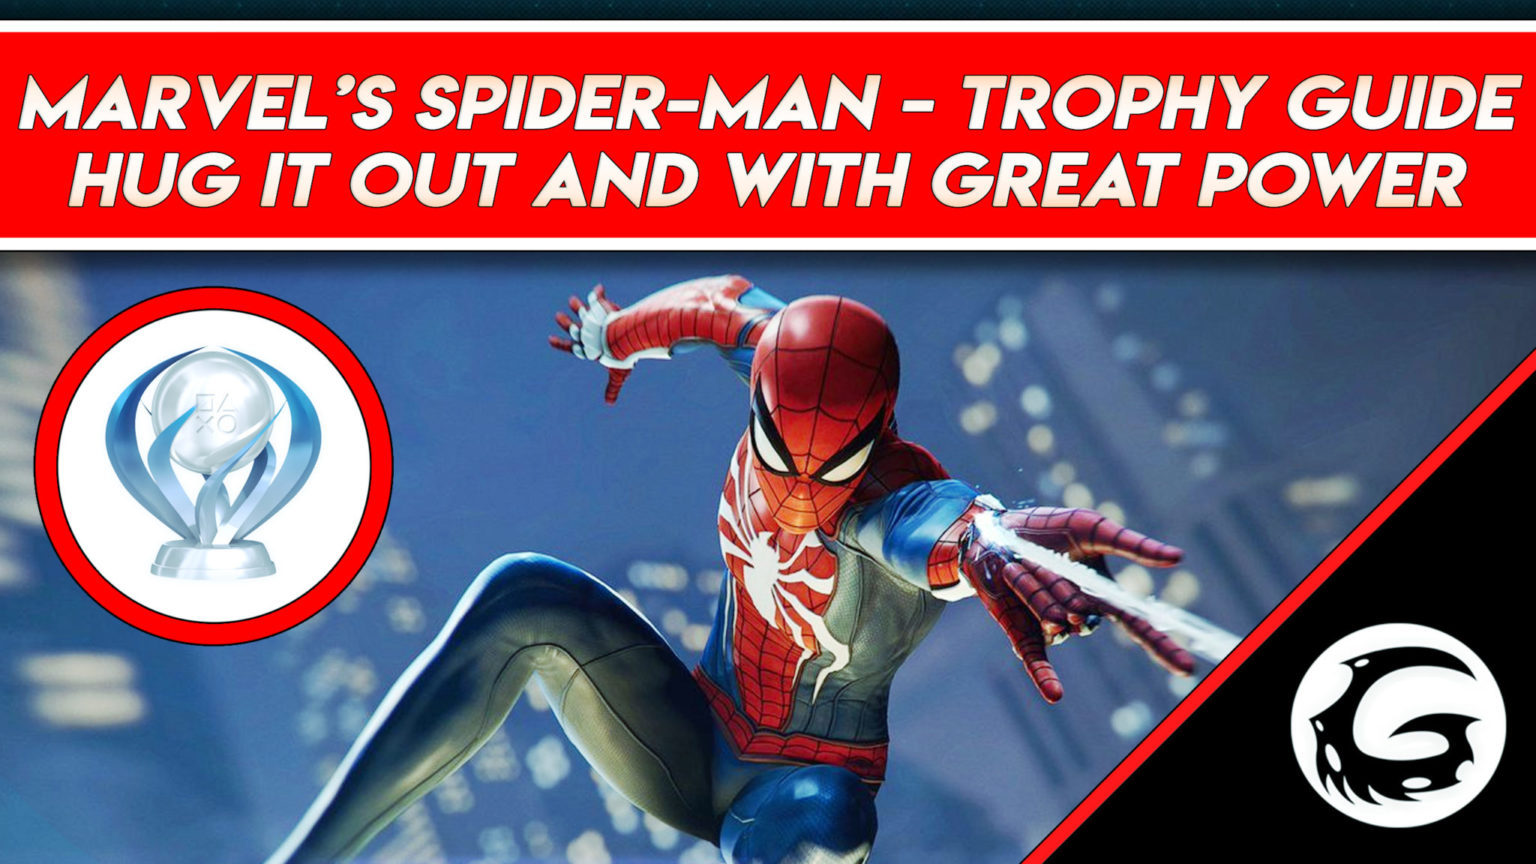 Trophy With Great Power and Hug It Out | Gaming Instincts